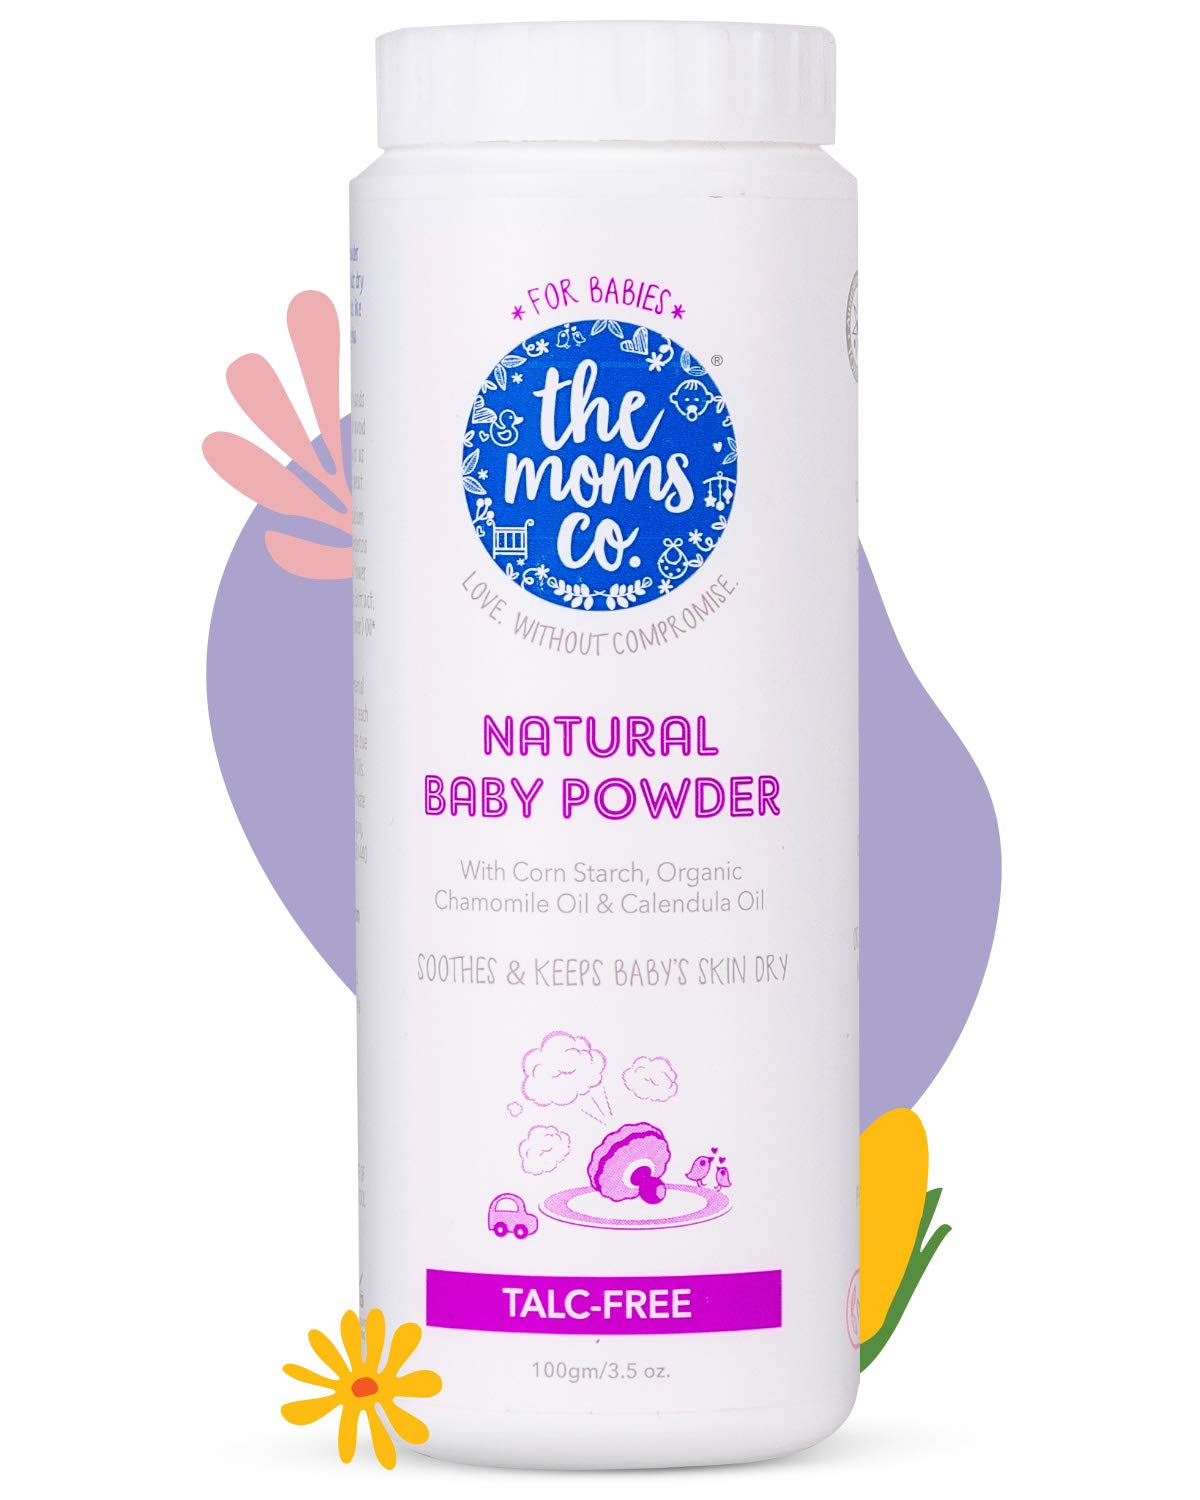 The Moms Co. Talc-Free Natural Baby Powder with Corn Starch | 100% Natural | Australia-Certified Toxin-Free | with Chamomile Oil, Calendula Oil and Organic Jojoba Oil - 100g